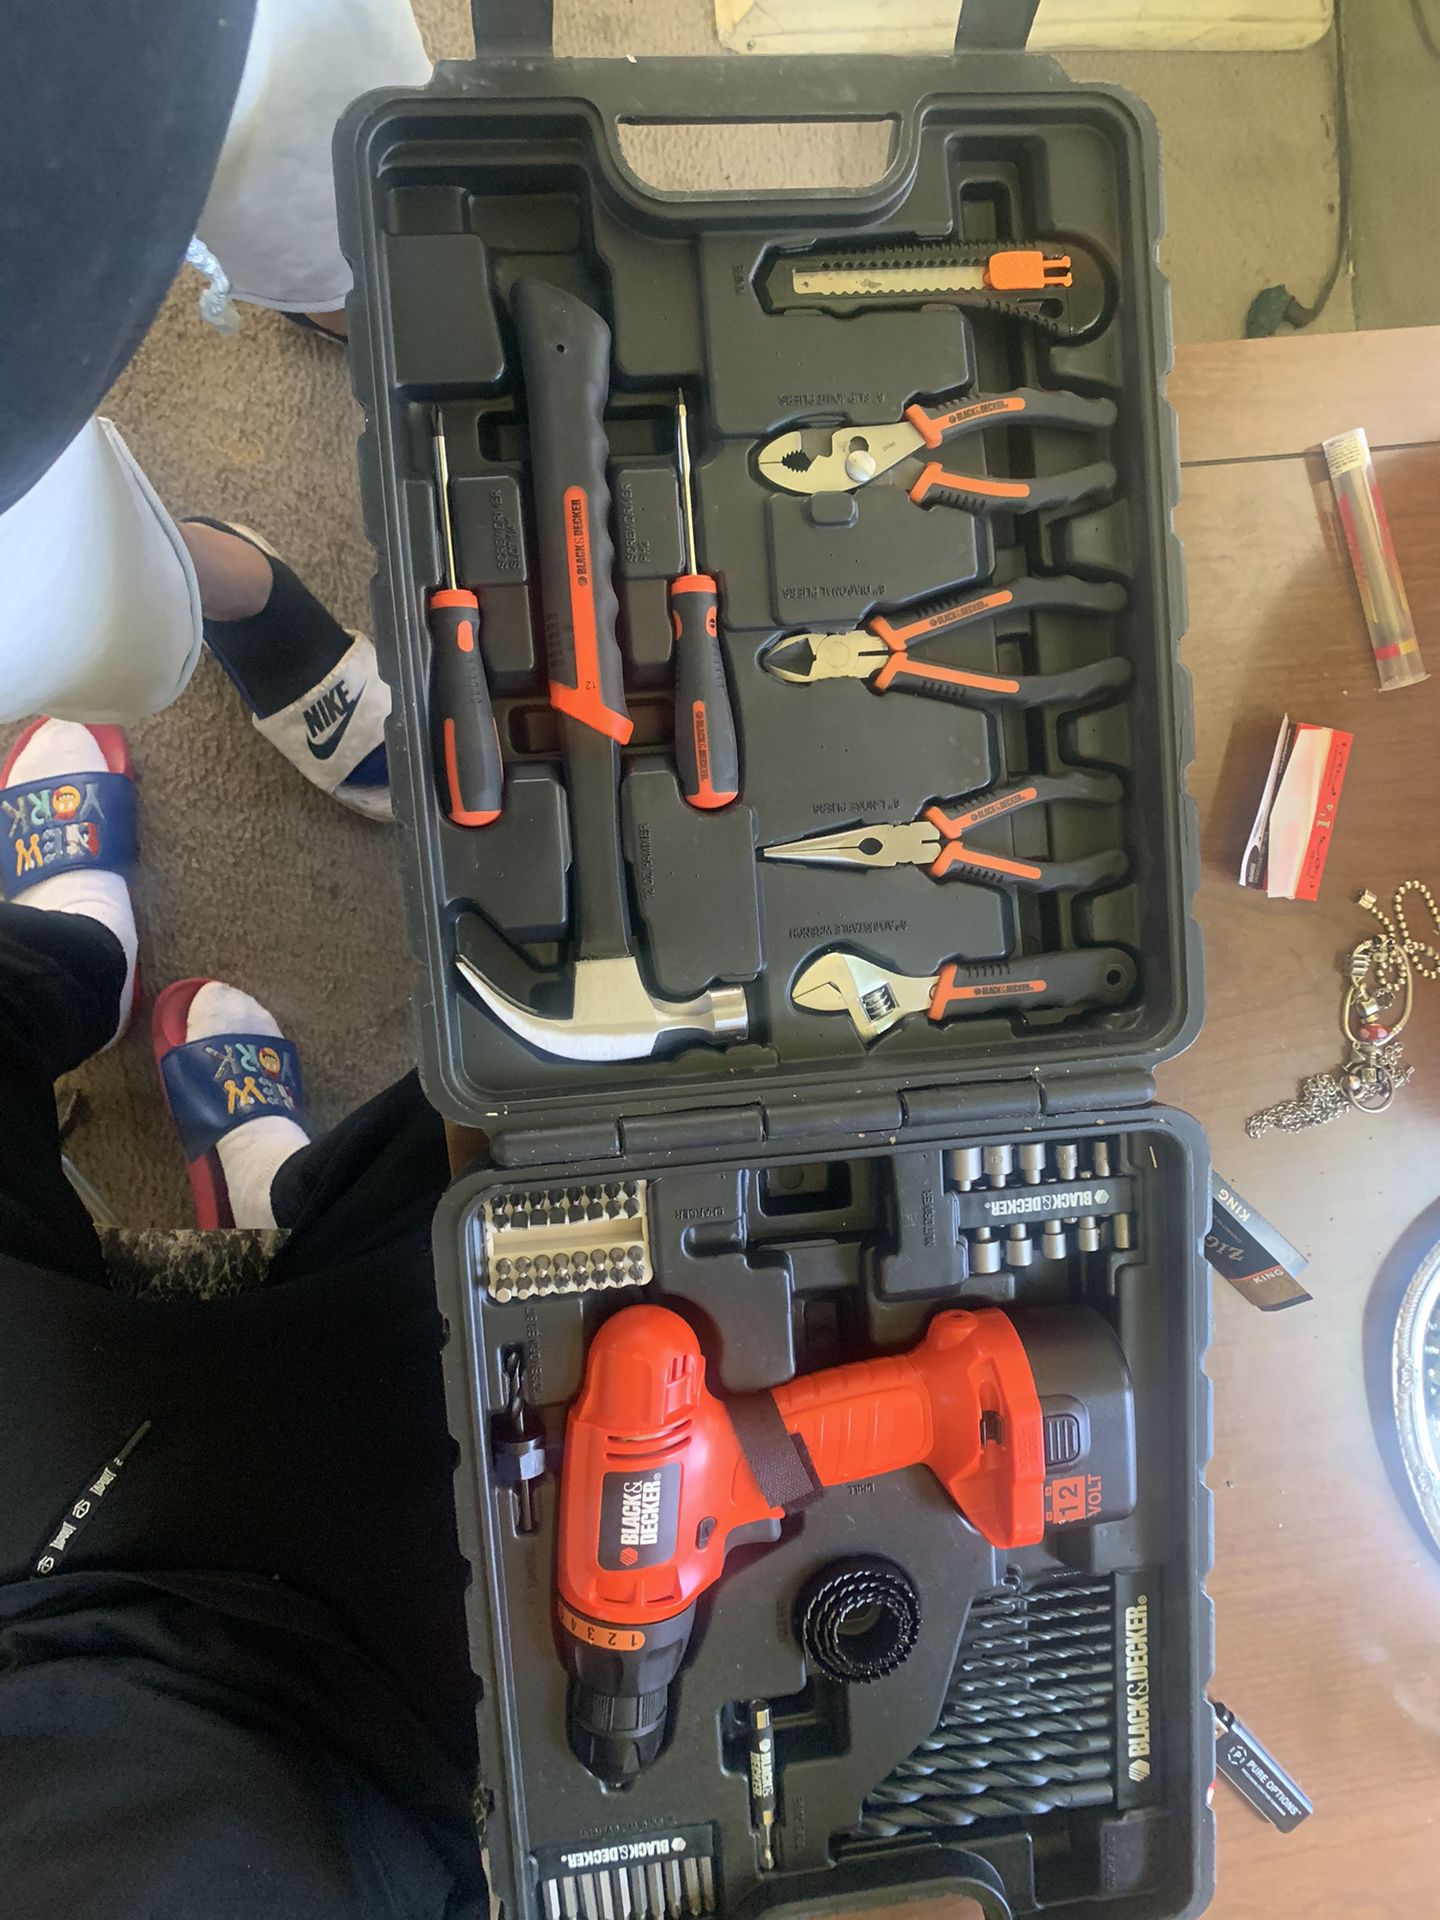 Black And Decker 75 Piece Tool Set With Power Drill Brand New 